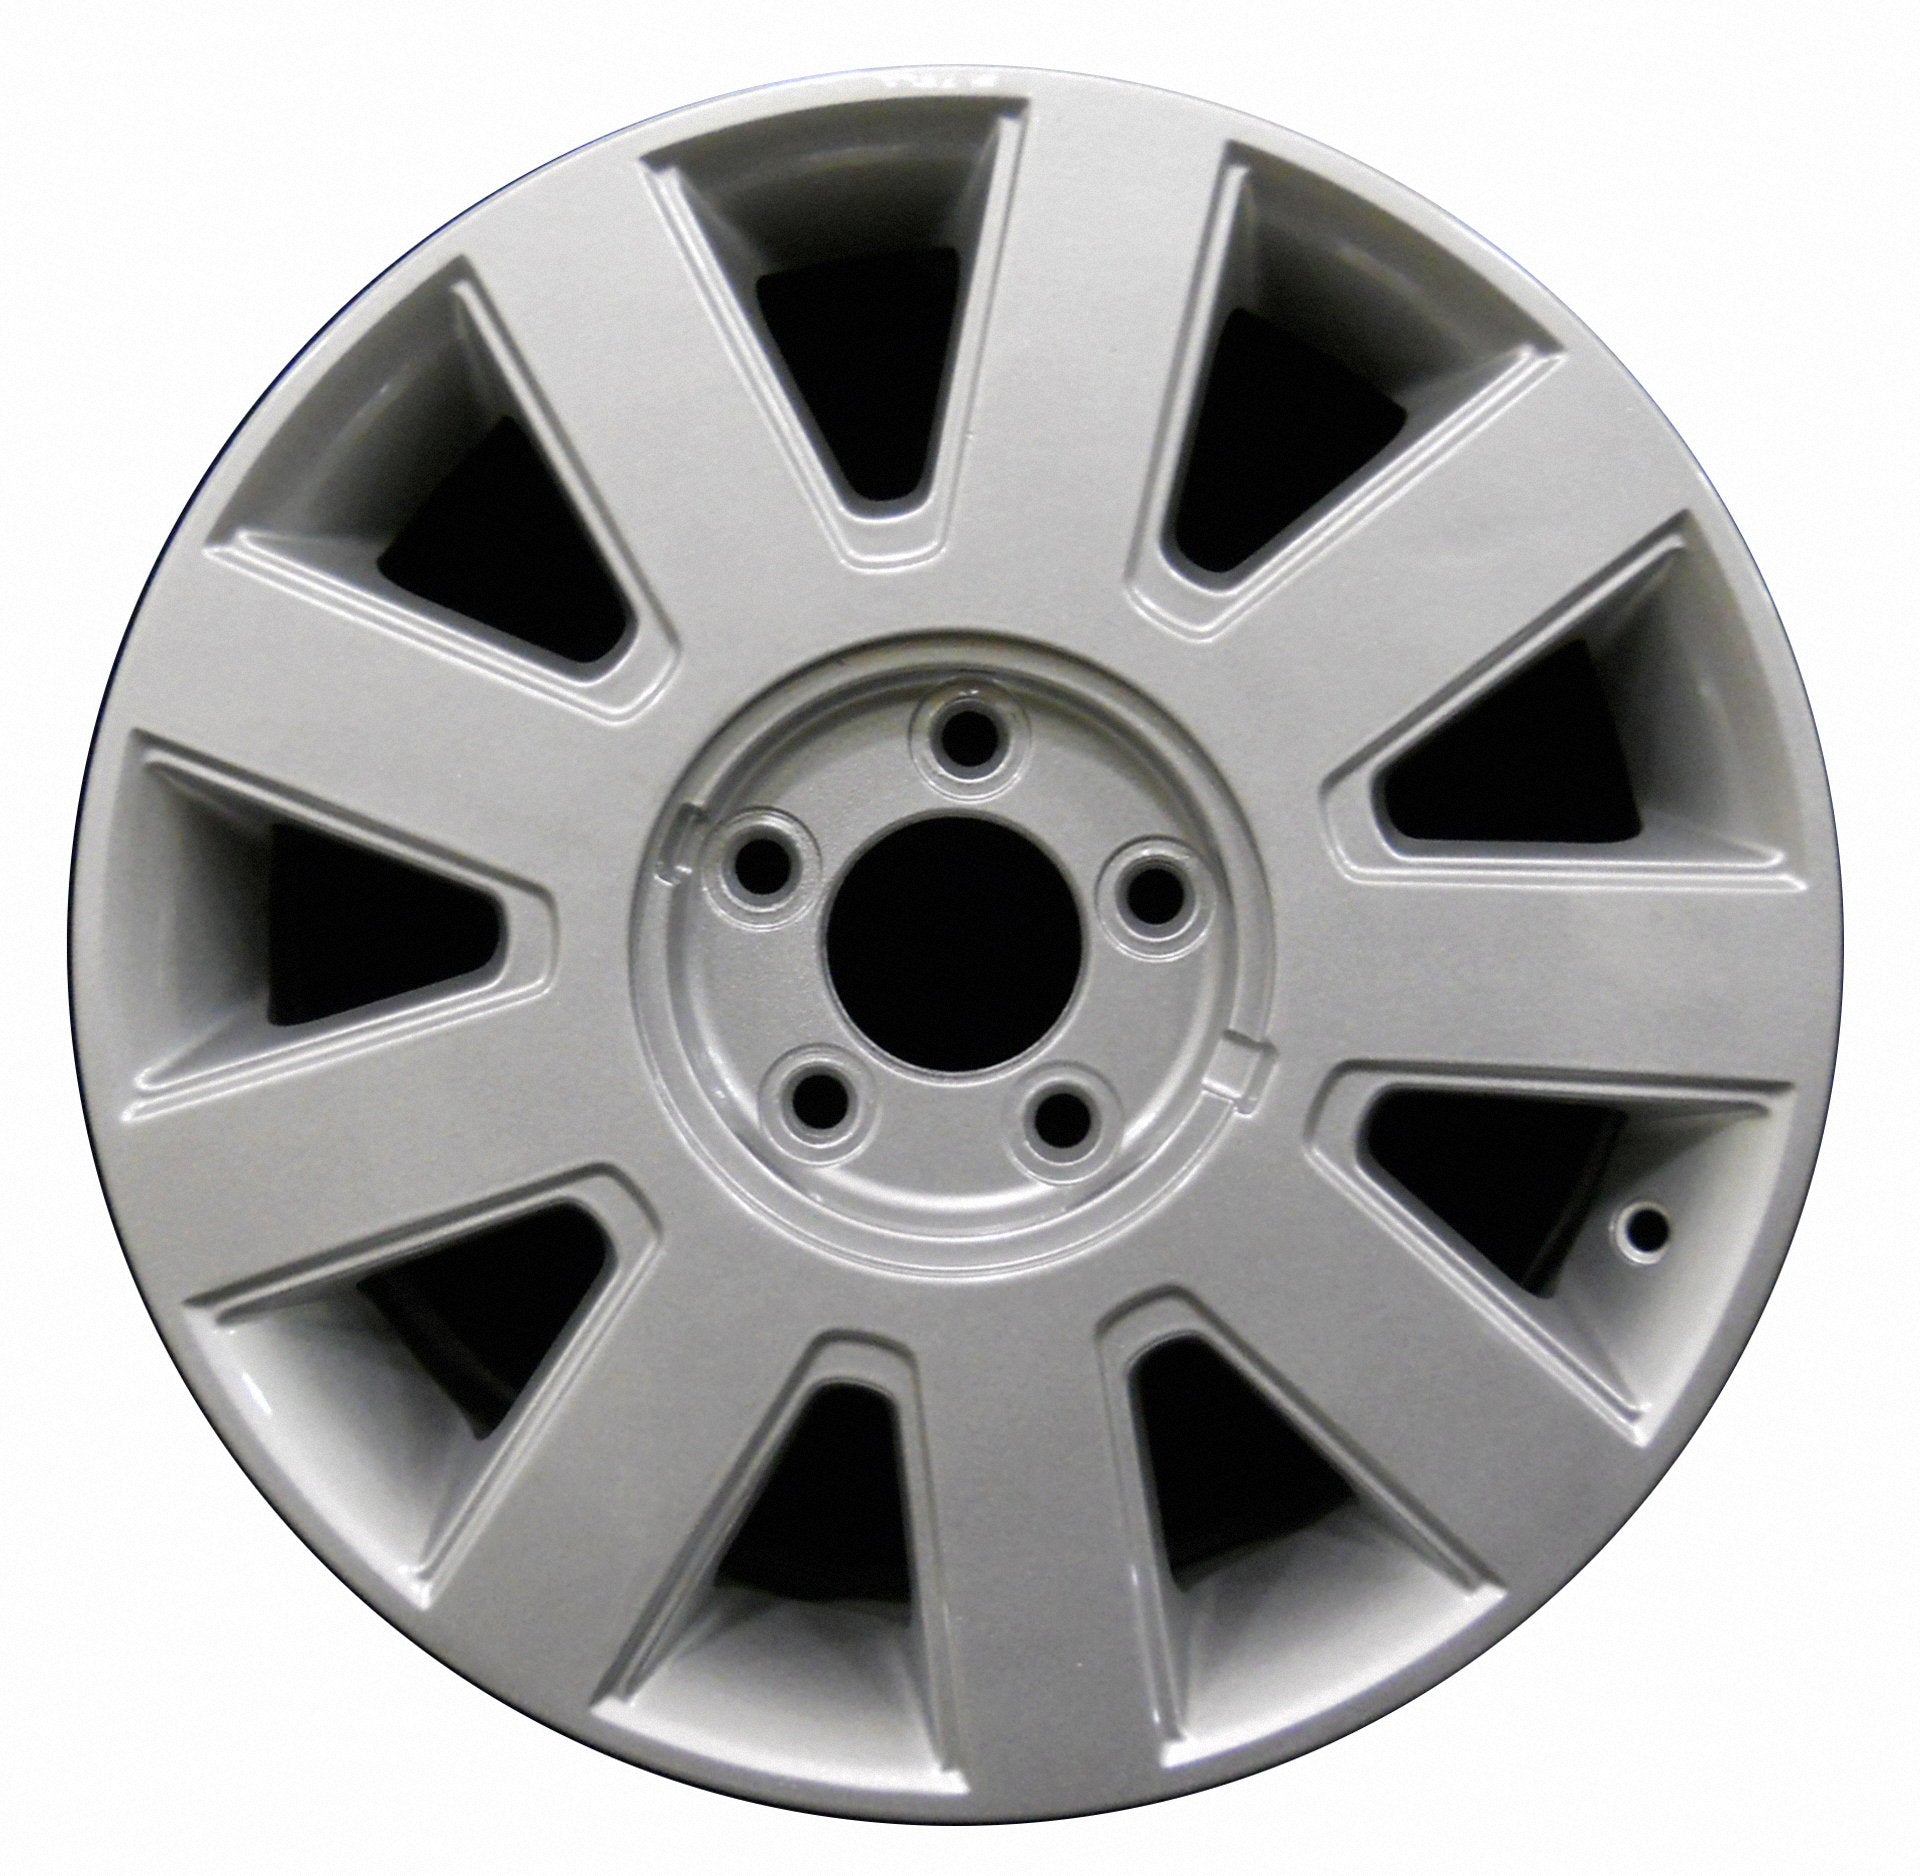 Lincoln Town Car  2003, 2004, 2005, 2006, 2007, 2008, 2009, 2010, 2011 Factory OEM Car Wheel Size 17x7 Alloy WAO.3501.PS02.FF